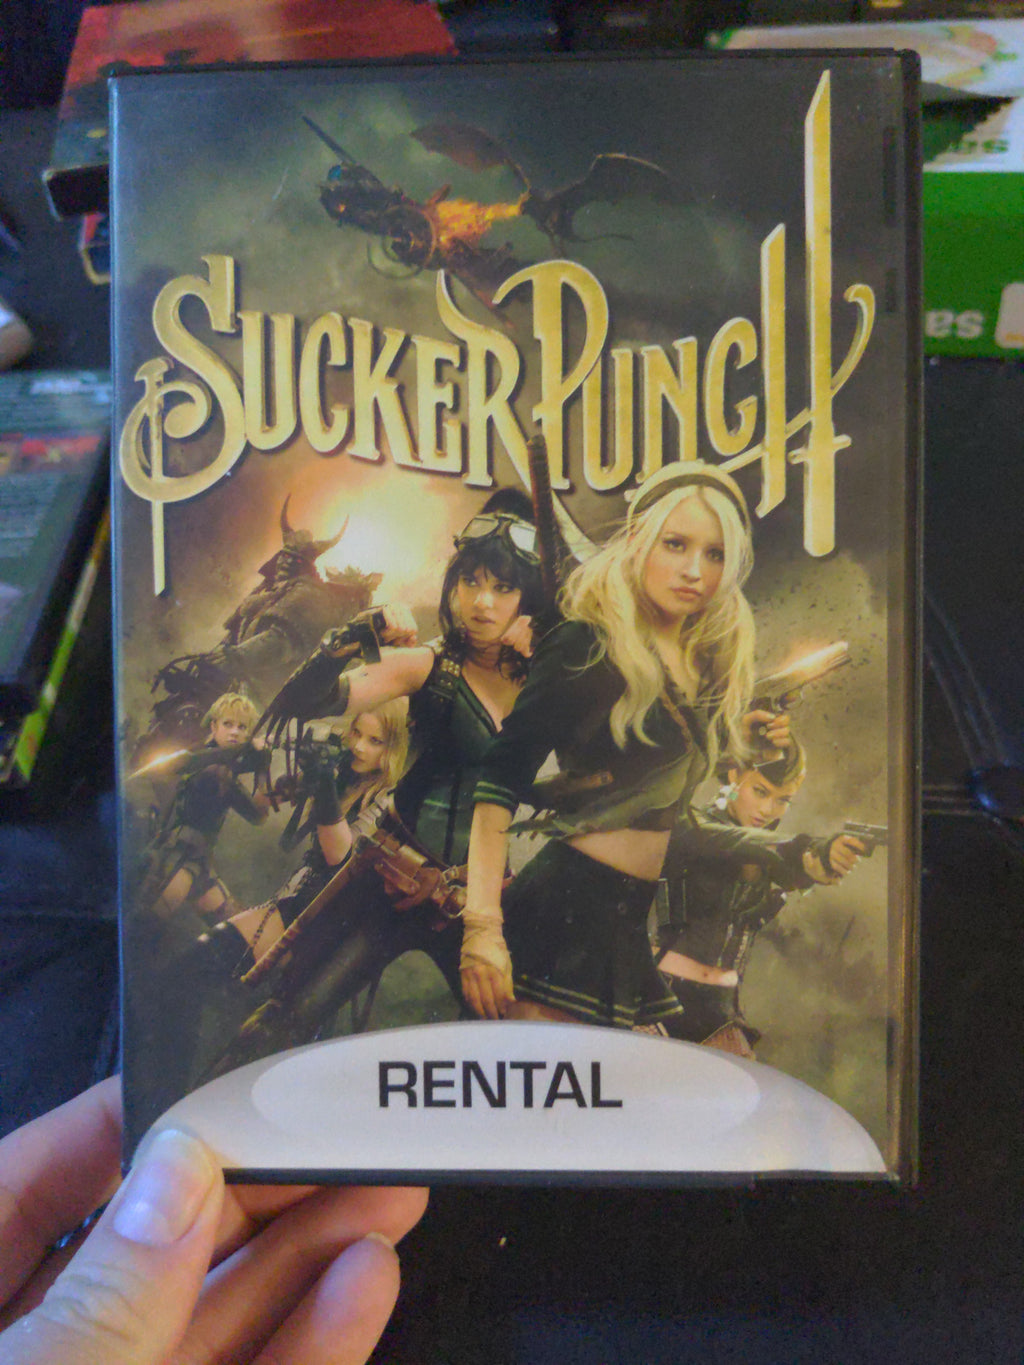 Sucker Punch Marked RENTAL on Case and DVD Blockbuster Video